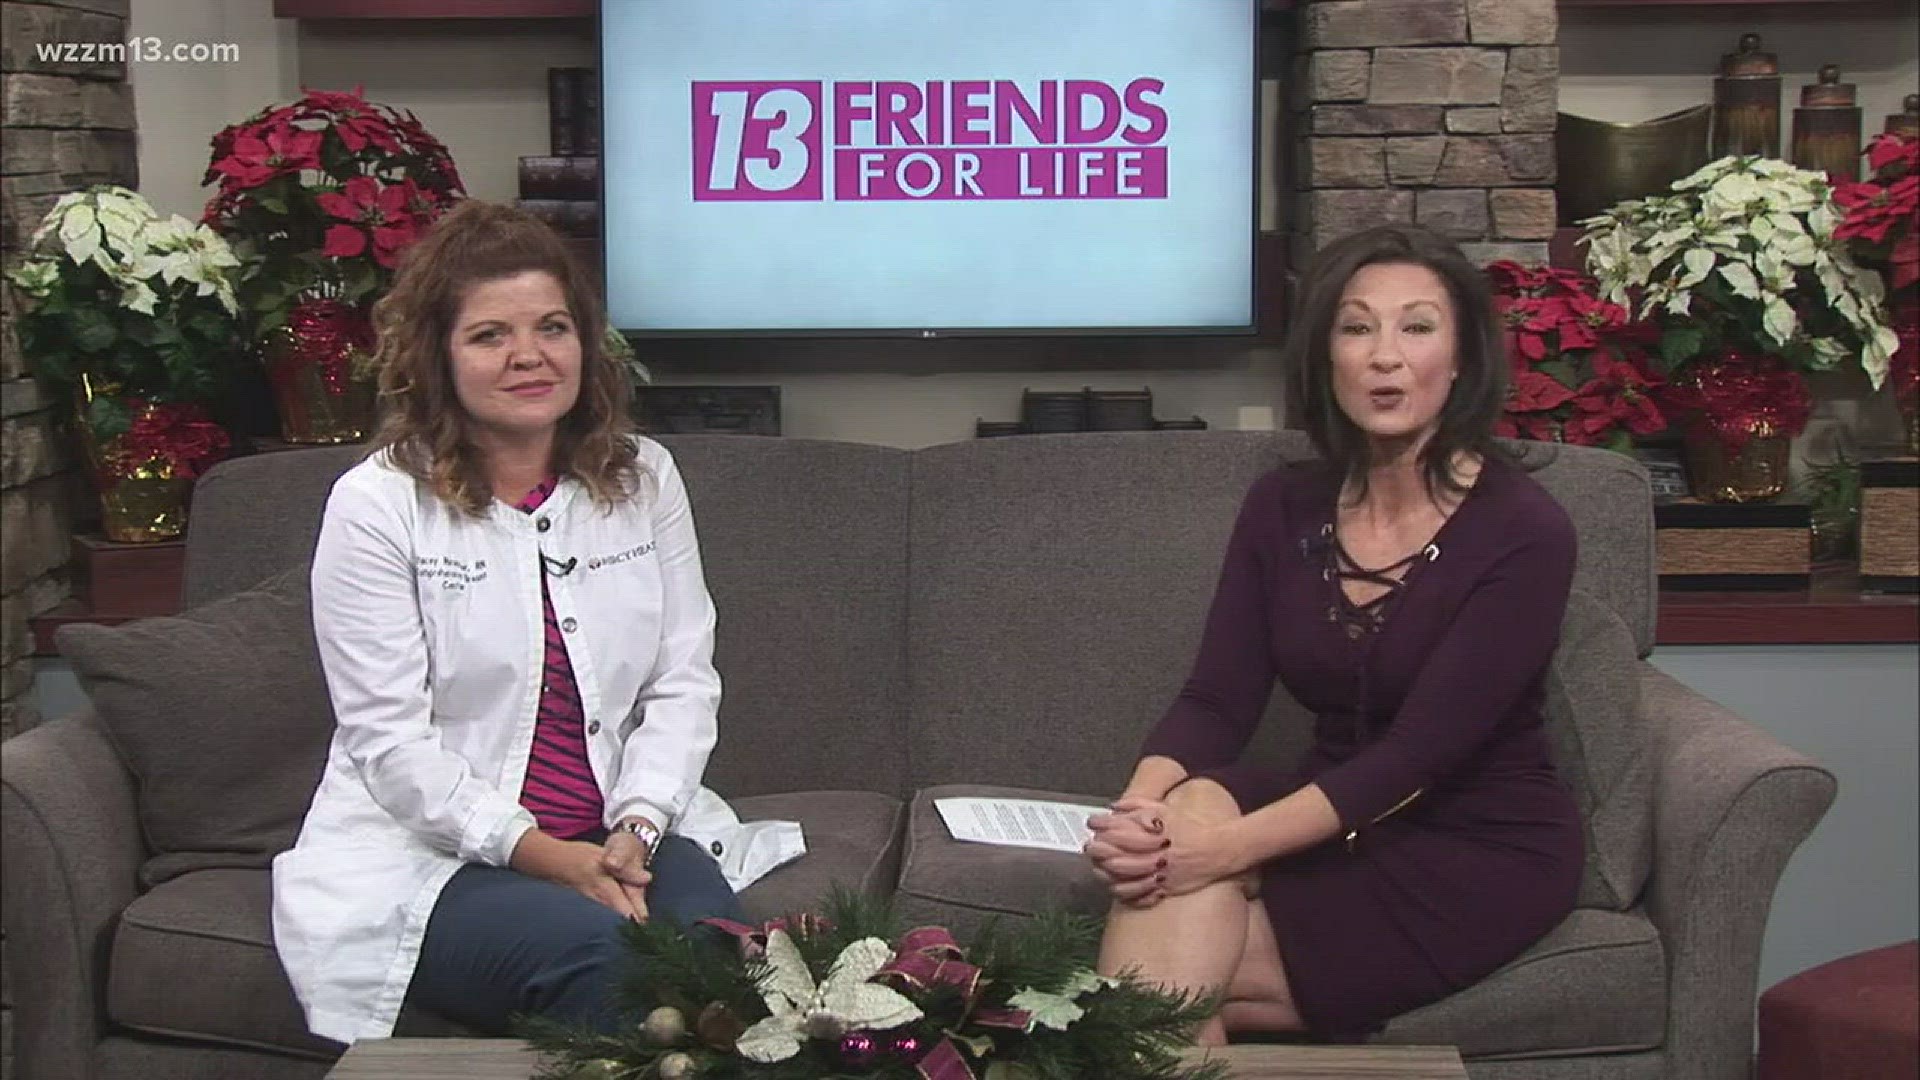 13 friends for life, how to improve your breast health